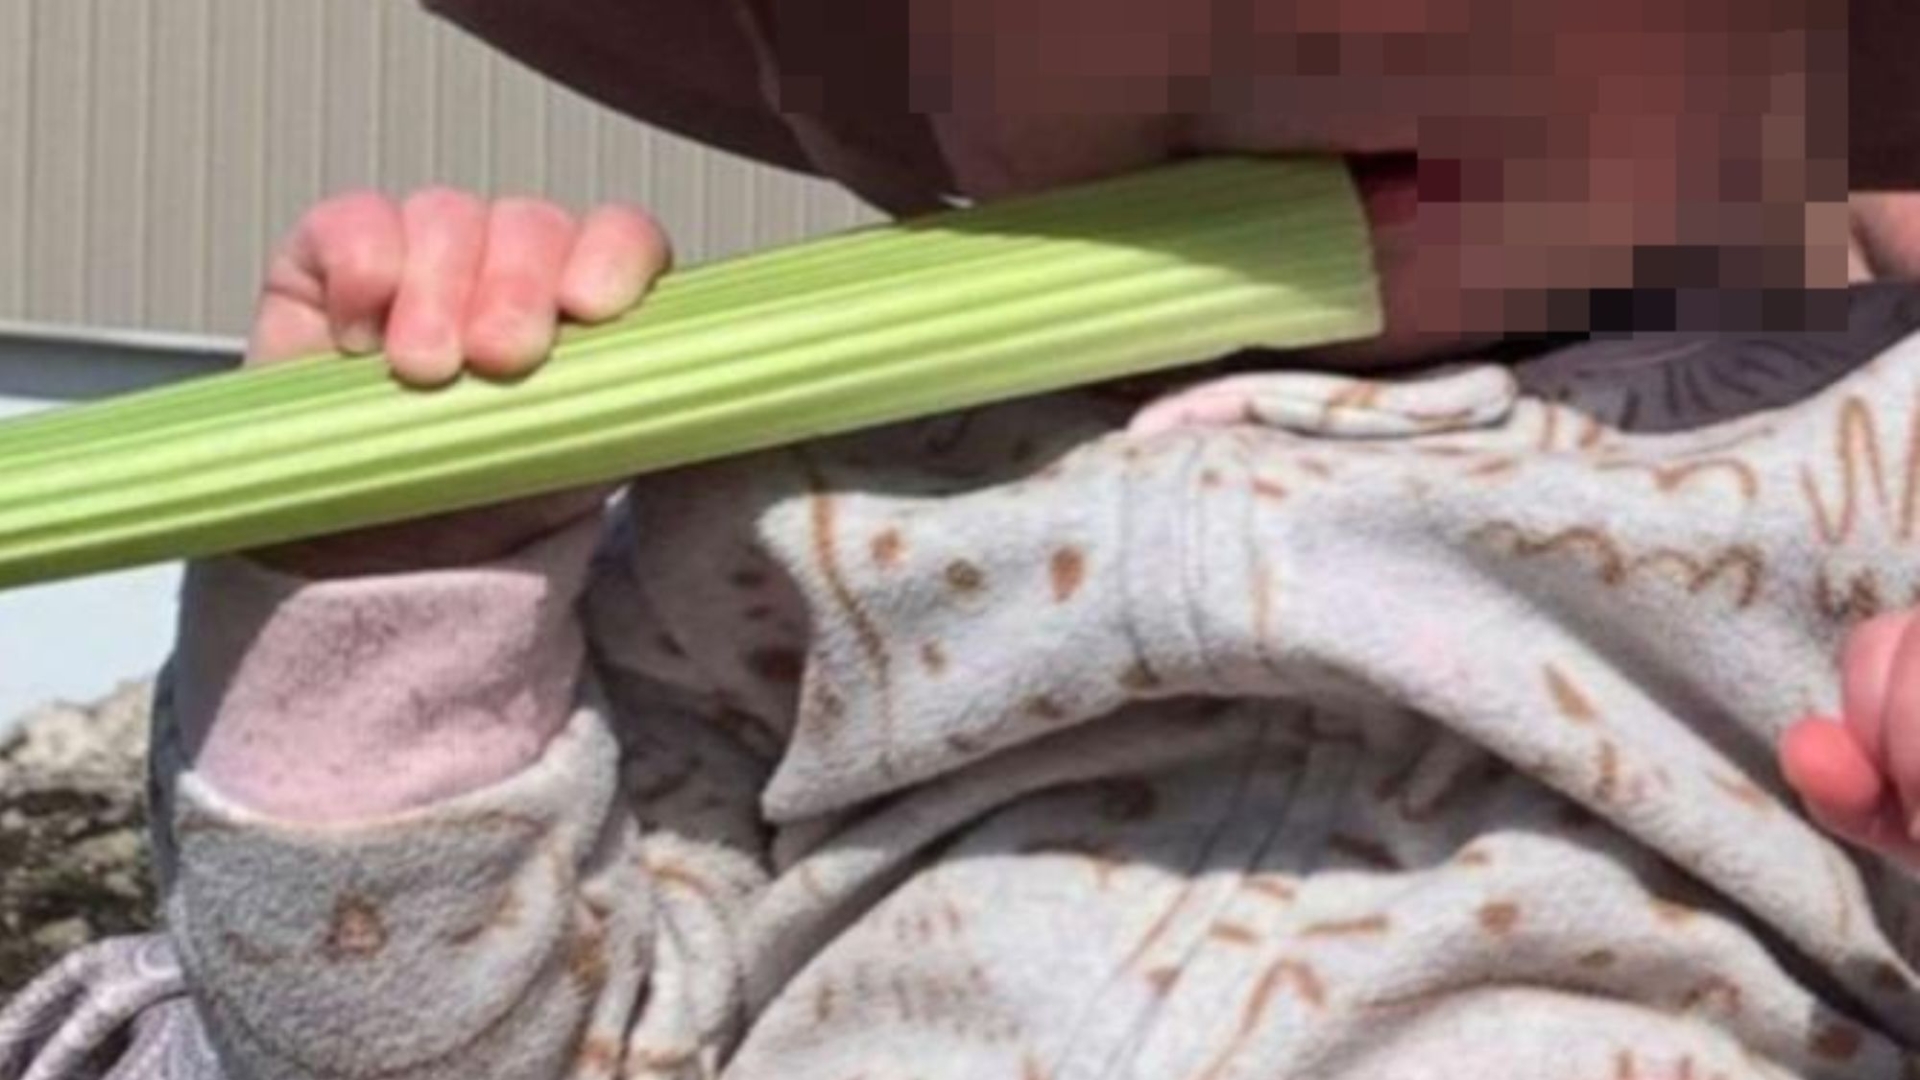 Baby left with raw and blistered lips after eating veggie stick